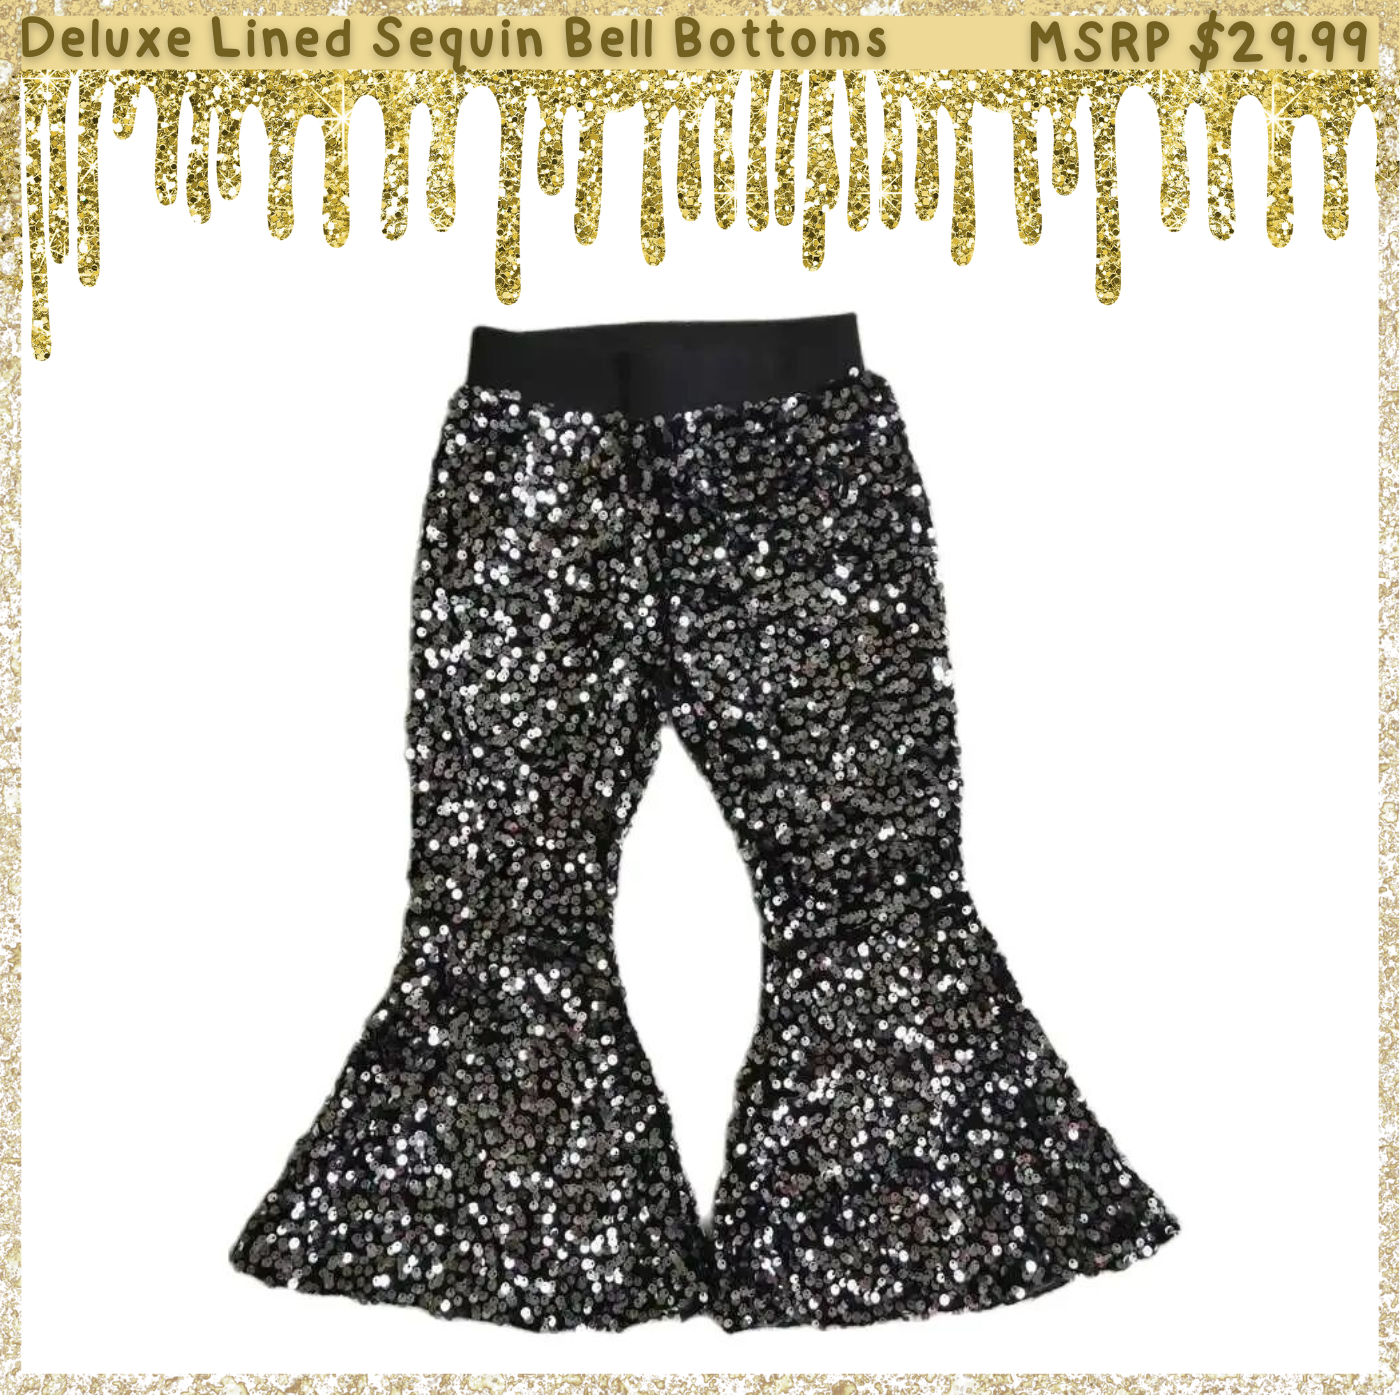 CHRISTMAS 4-Pack: Girls Deluxe Lined Sequin Bell Bottoms (Flare Pants)